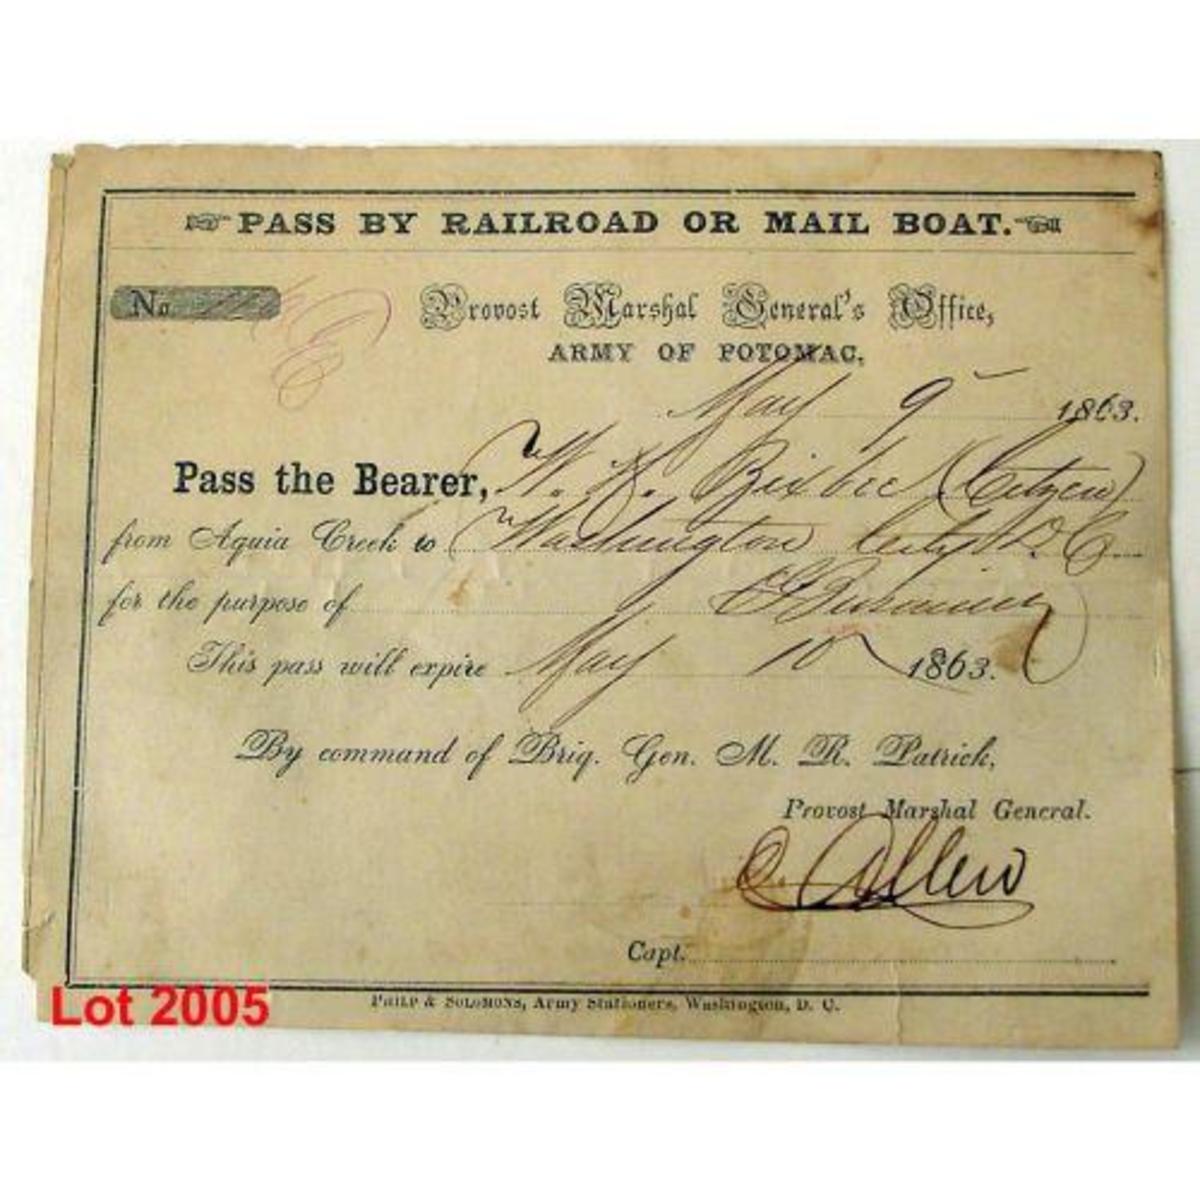 A pass for a soldier to leave camp